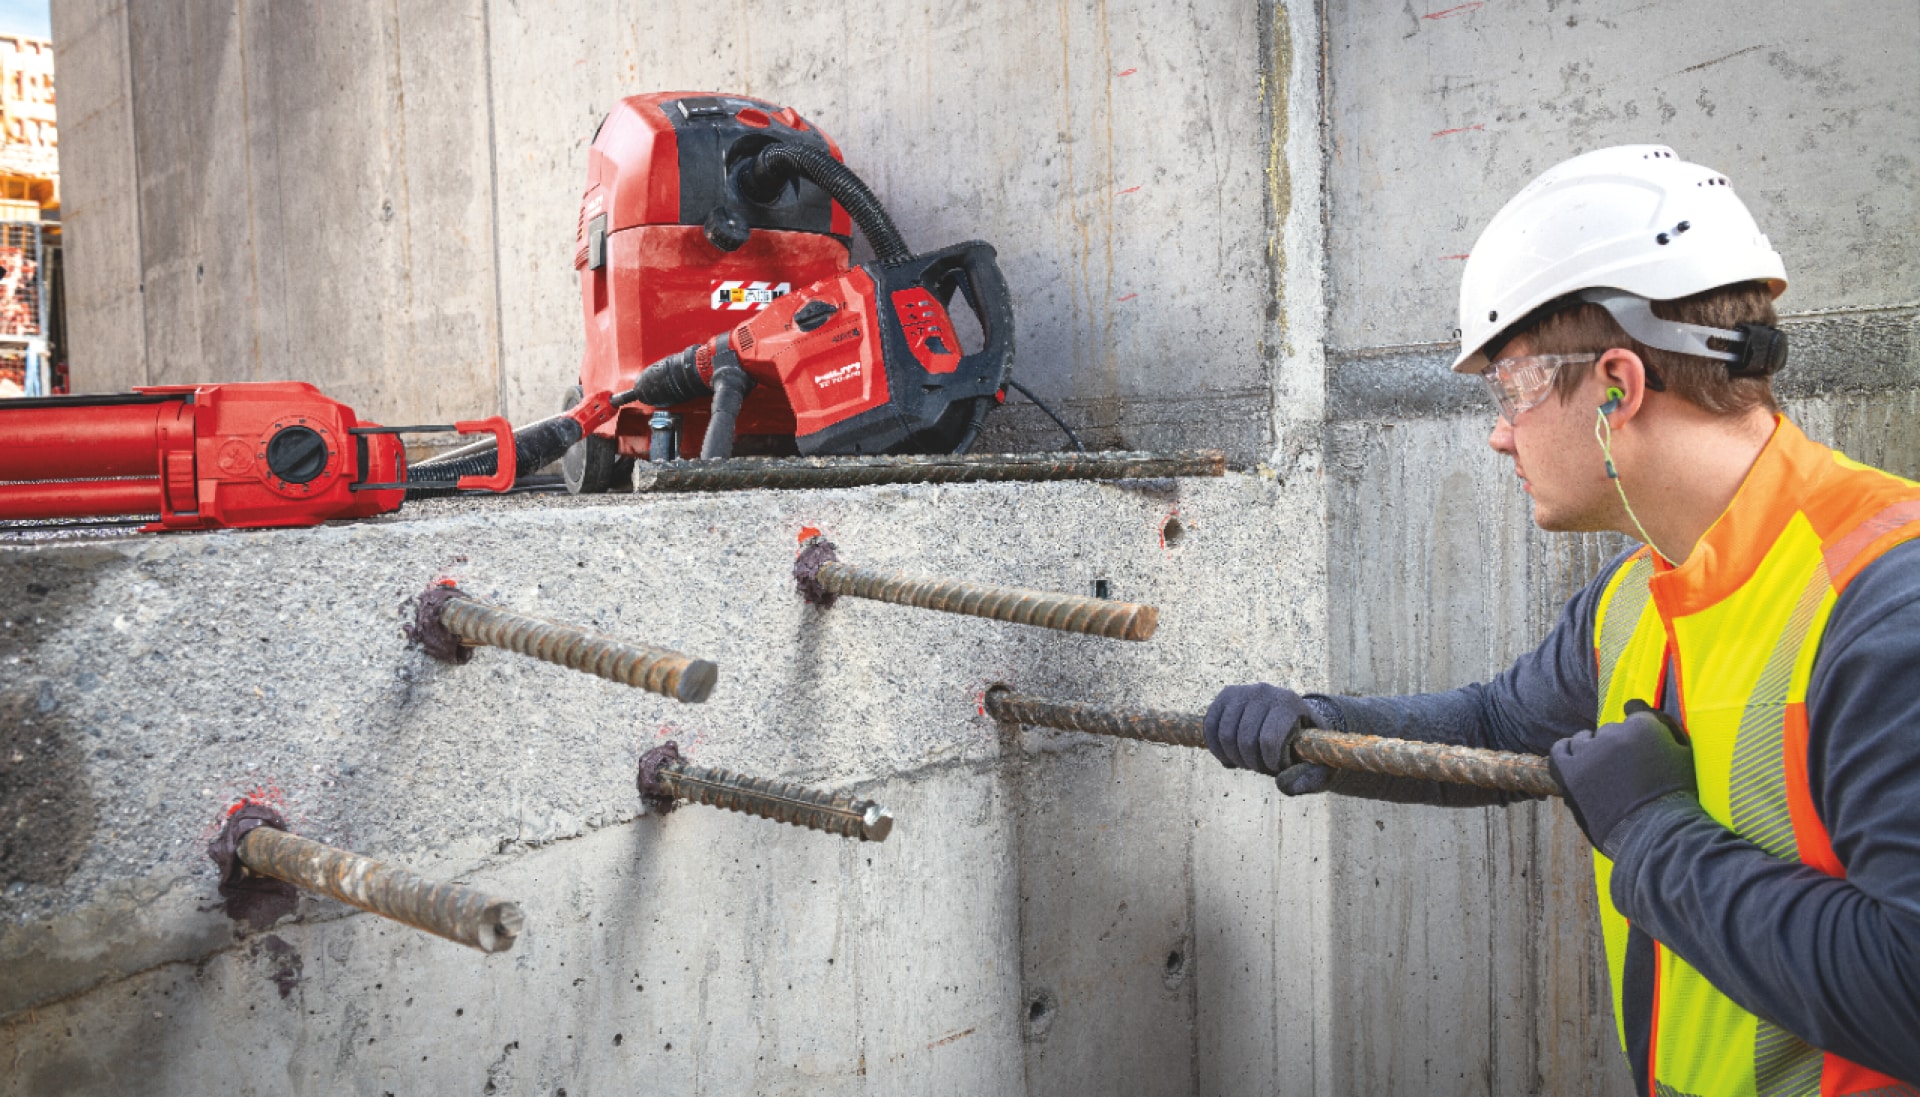 Hilti’s post-installed rebar solutions cover everything from design to testing